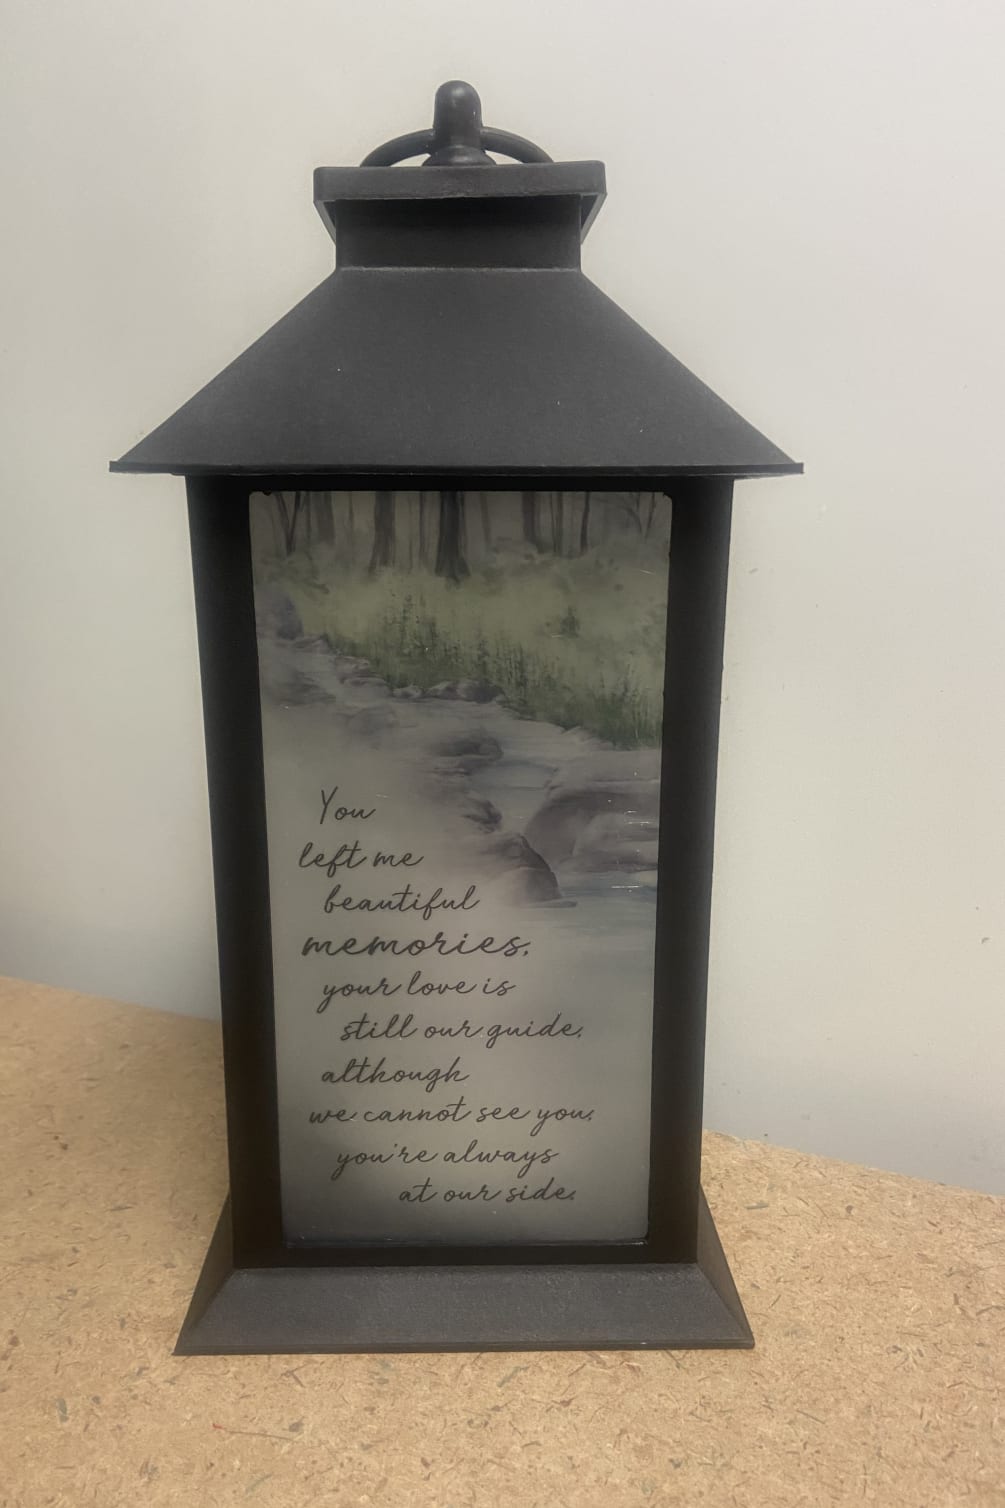 This beautiful black high quality polyresin finish lantern surrounds an interior of